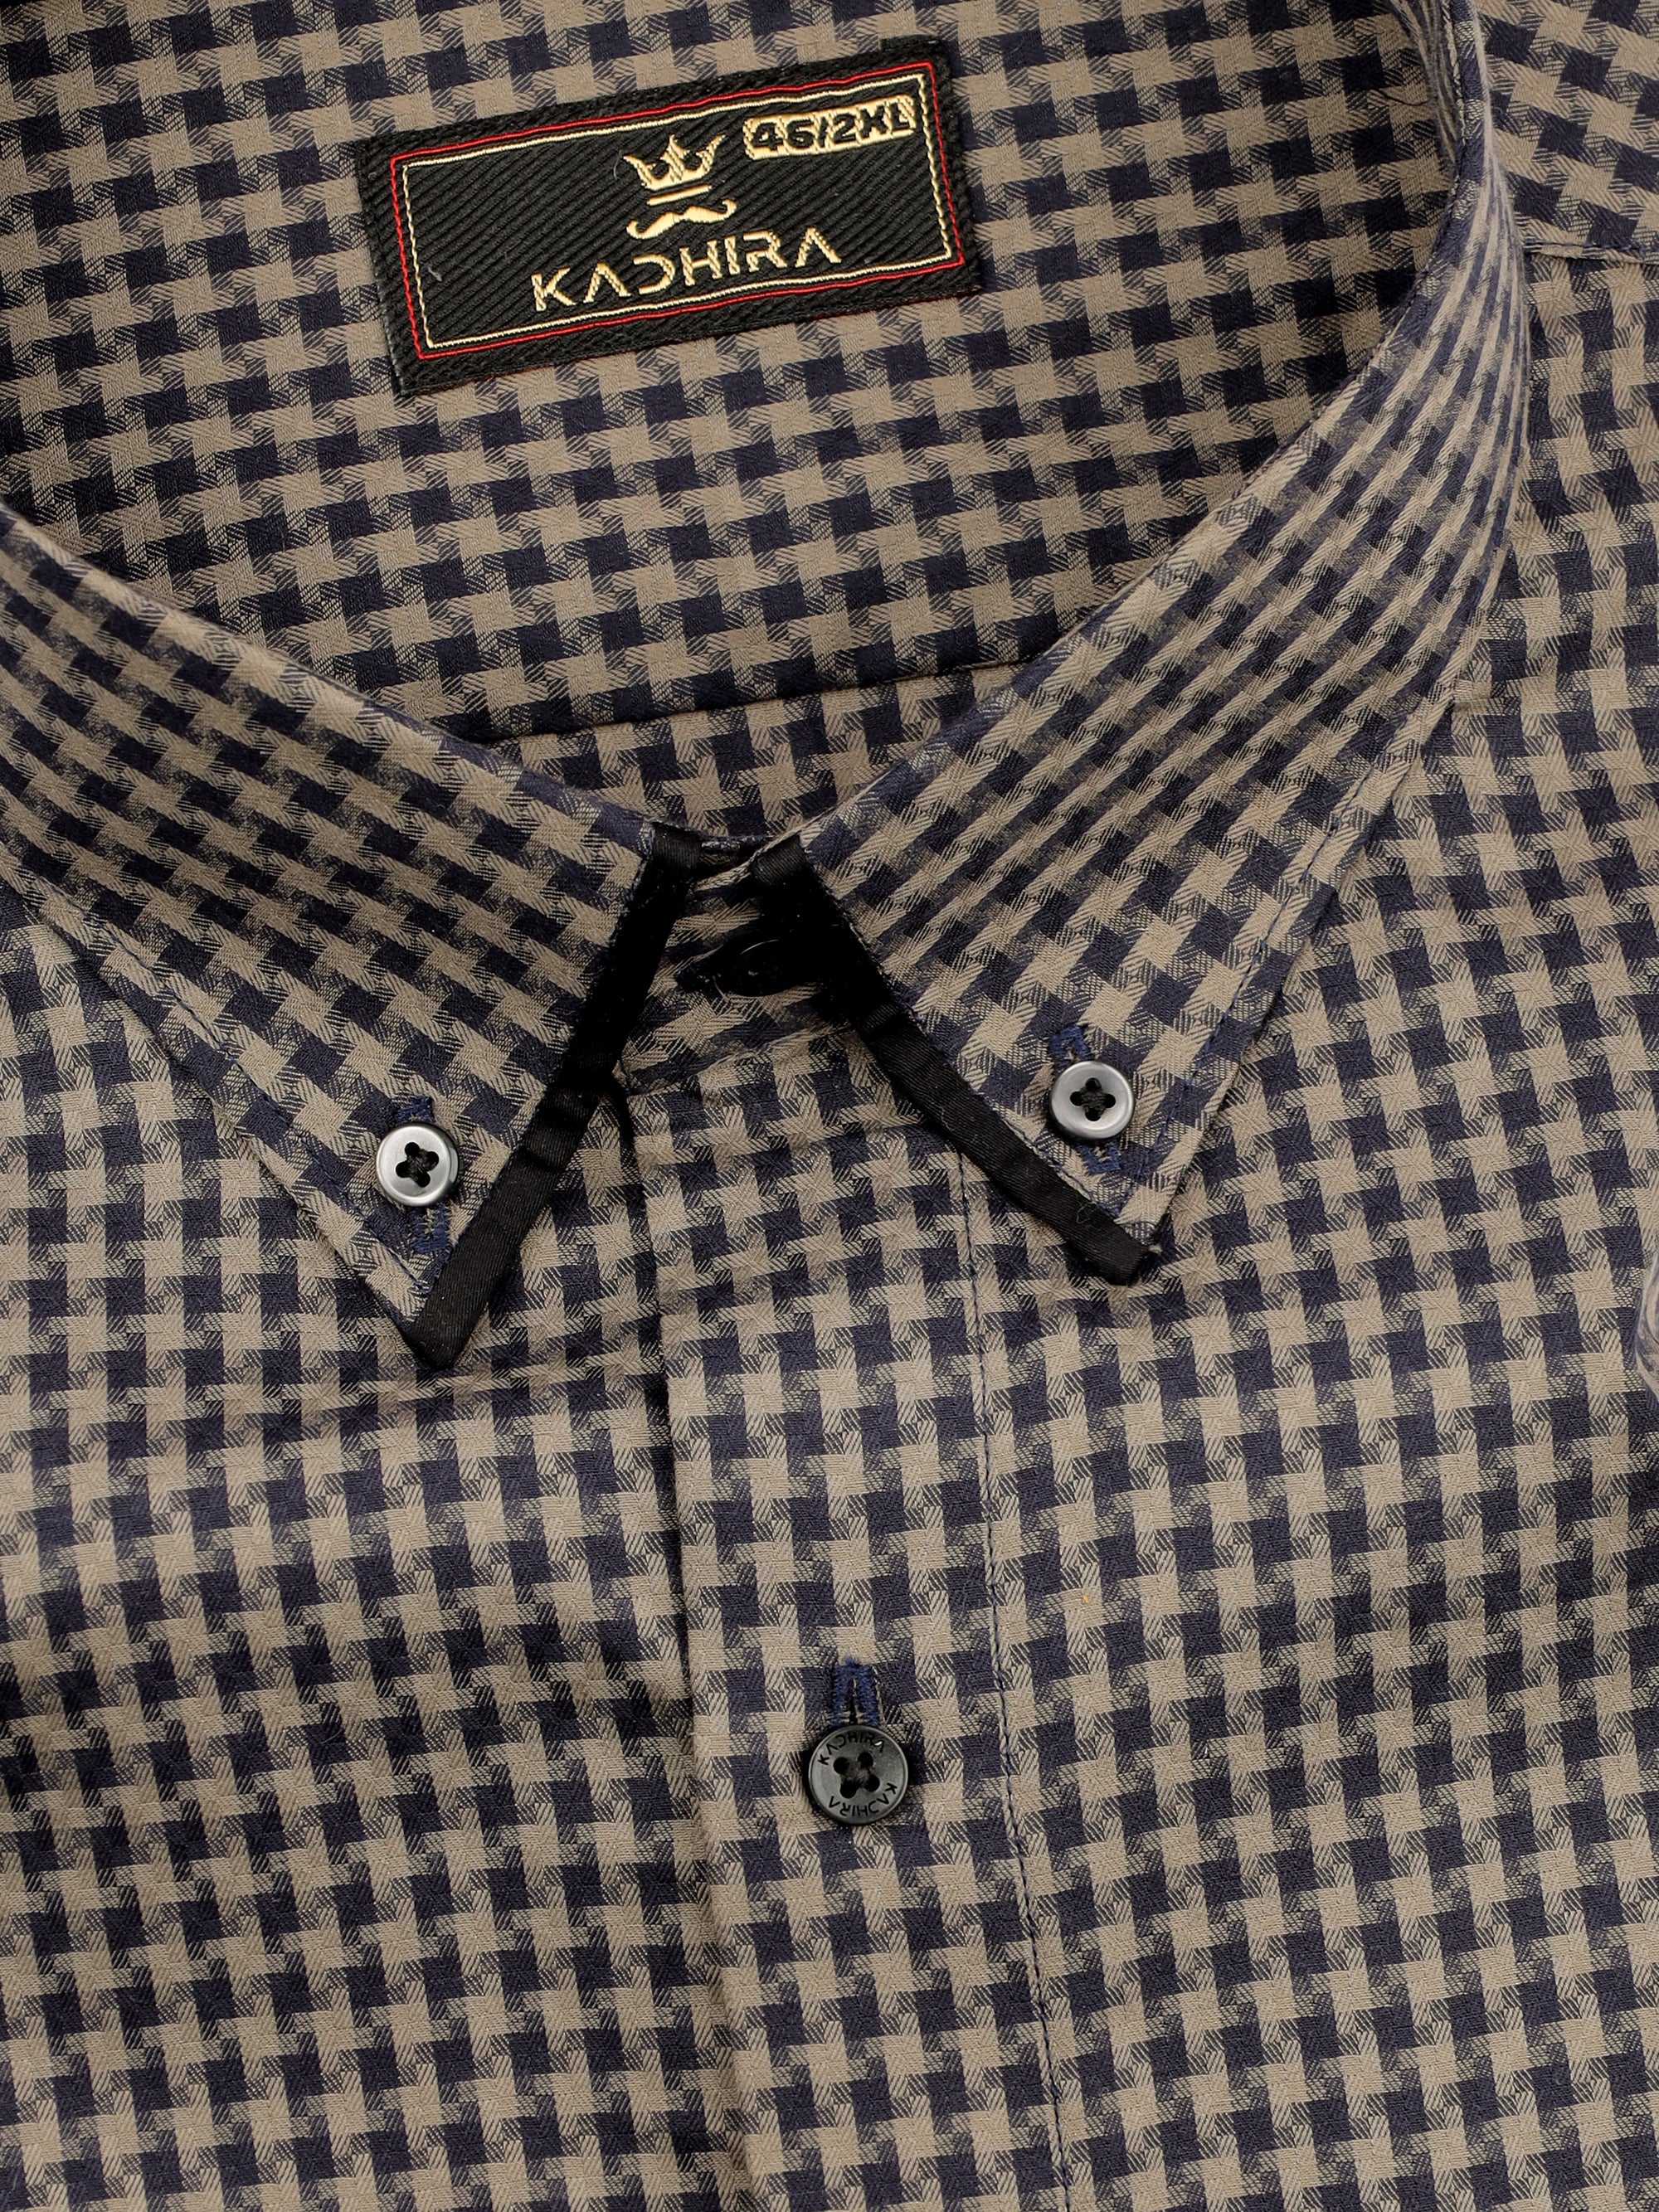 Navy Blue With Gray Dobby Textured Jacquard Cotton Shirt